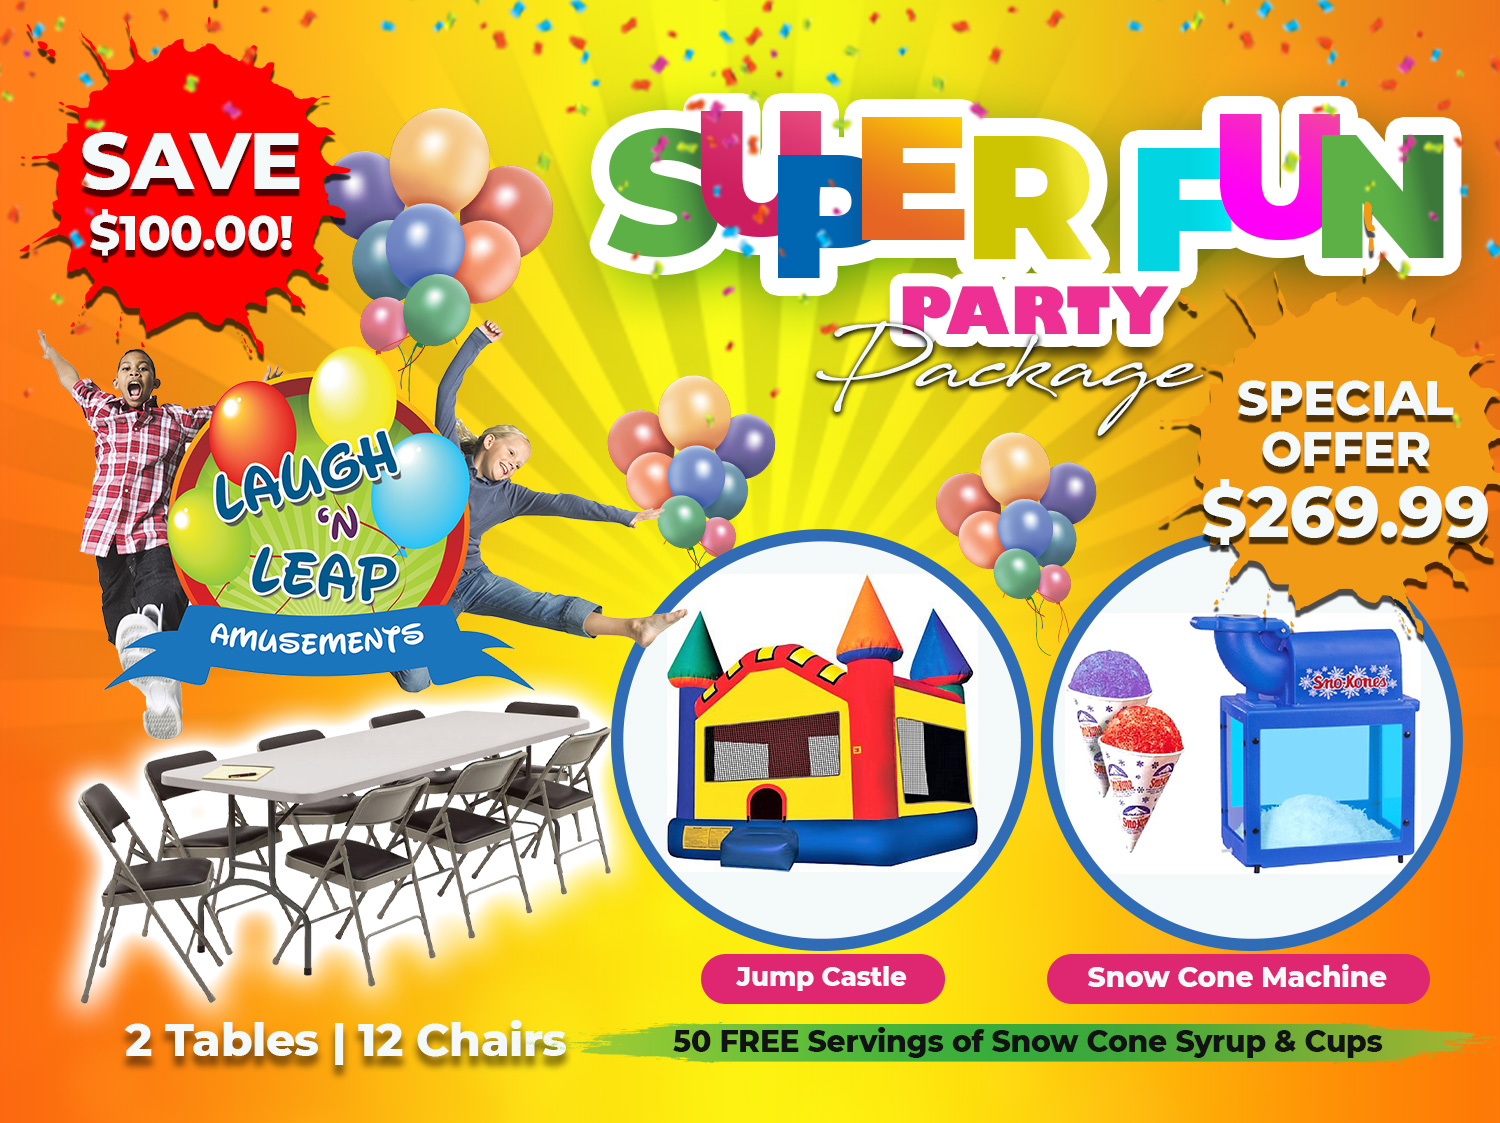 Super Fun Party Package